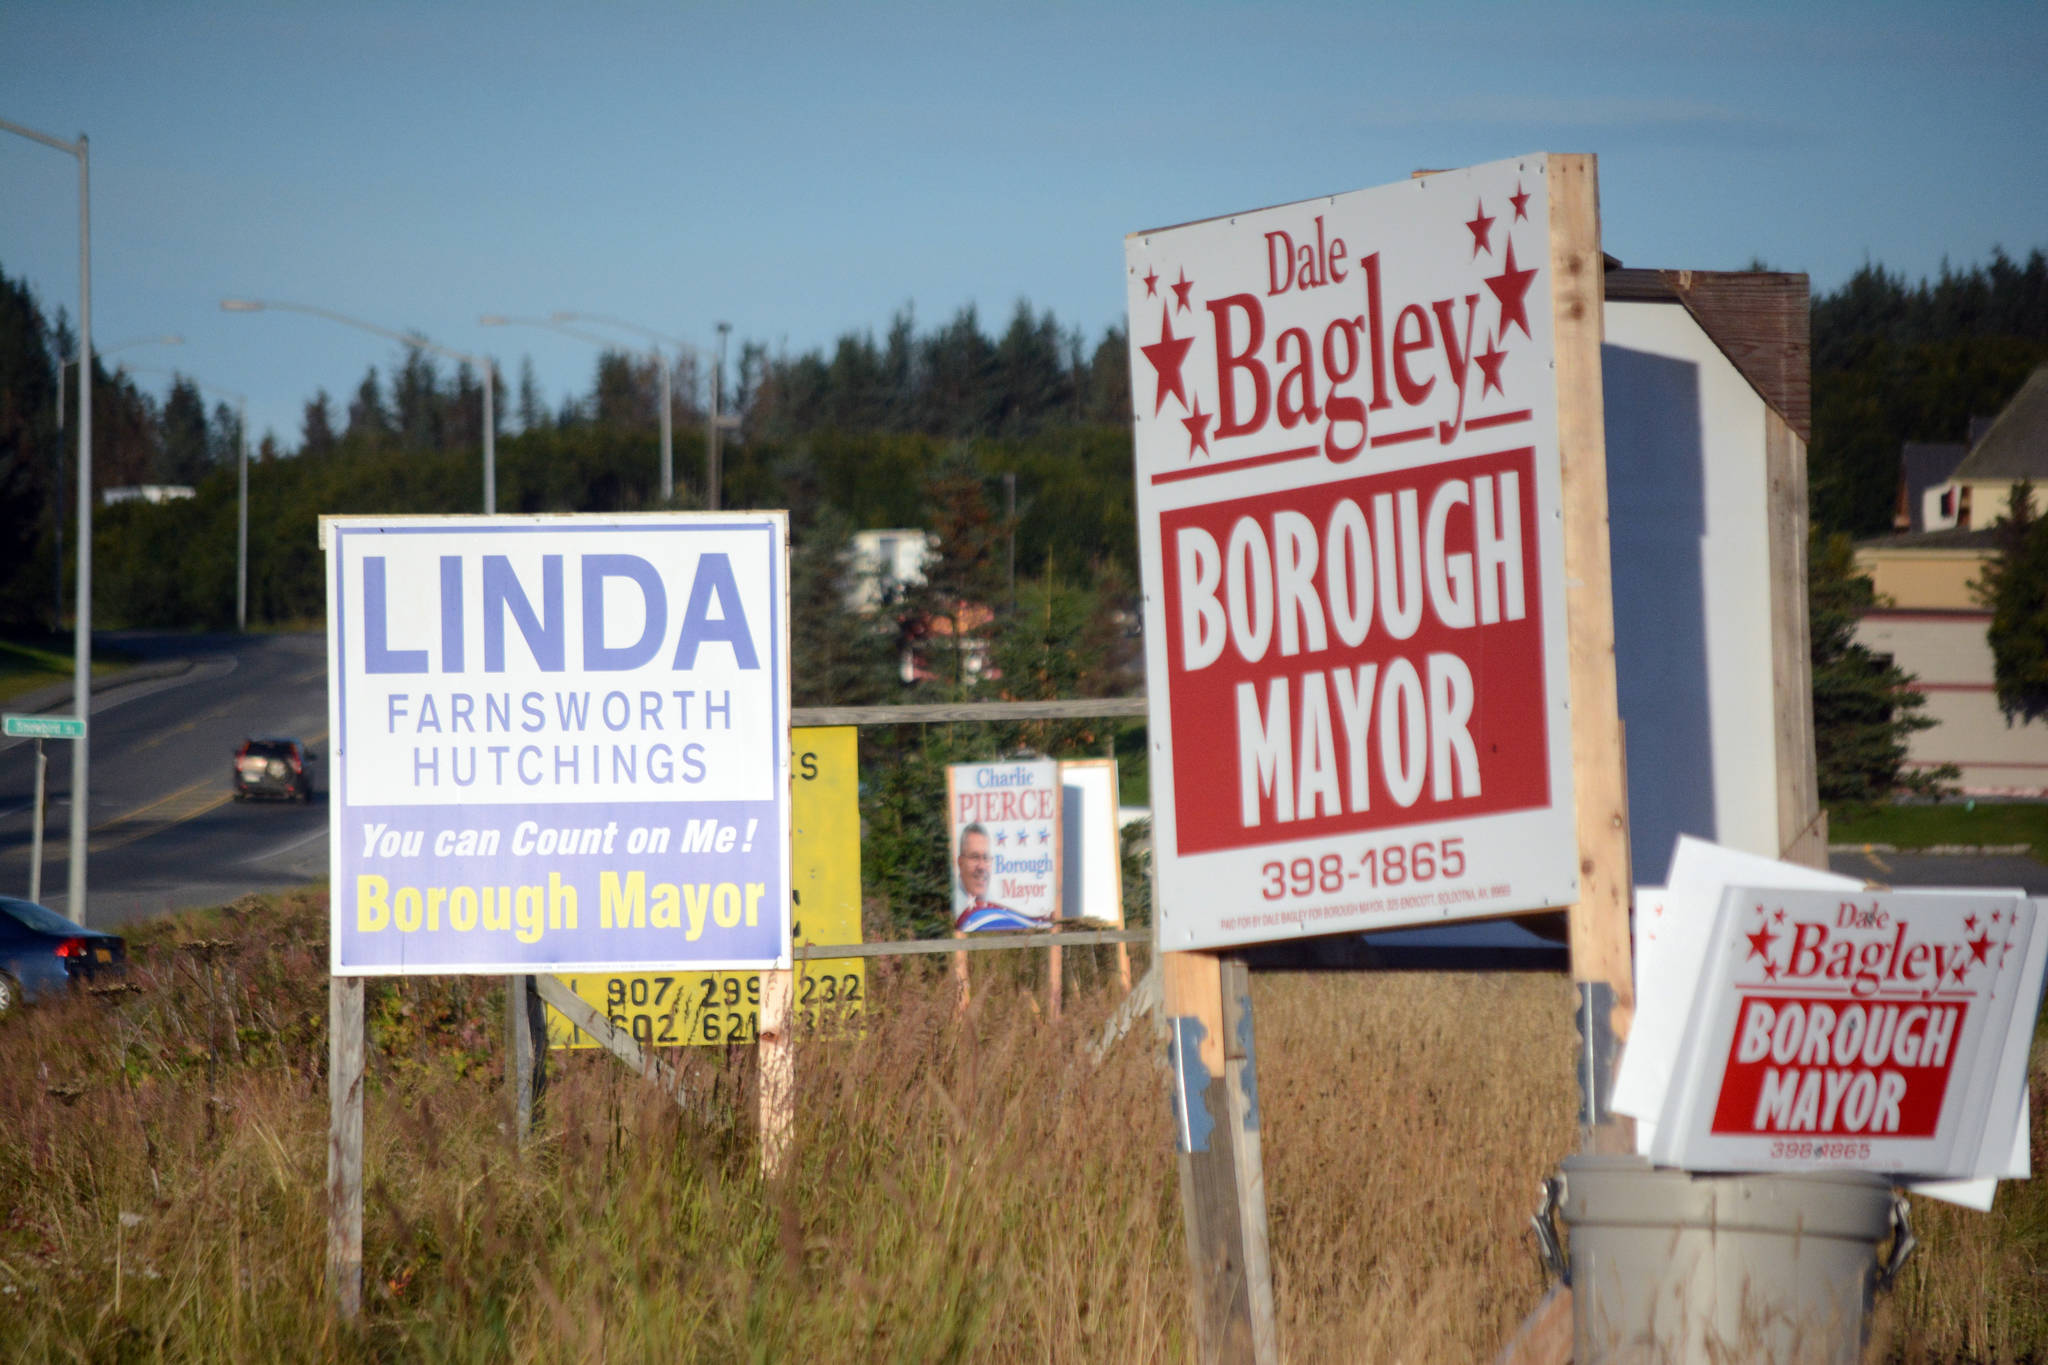 Campaign signs for Kenai Peninsula Borough mayoral candidates, shown here Monday, Sept. 11, 2017, have been placed on a lot along the Homer Bypass at the corner of Lake Street. According to state law, no sign visible and legible from the road can be placed along state right of ways such as the Bypass and Lake Street unless the sign is related to a business. The “for sale” sign the background would be legal. (Photo by Michael Armstrong/Homer News)